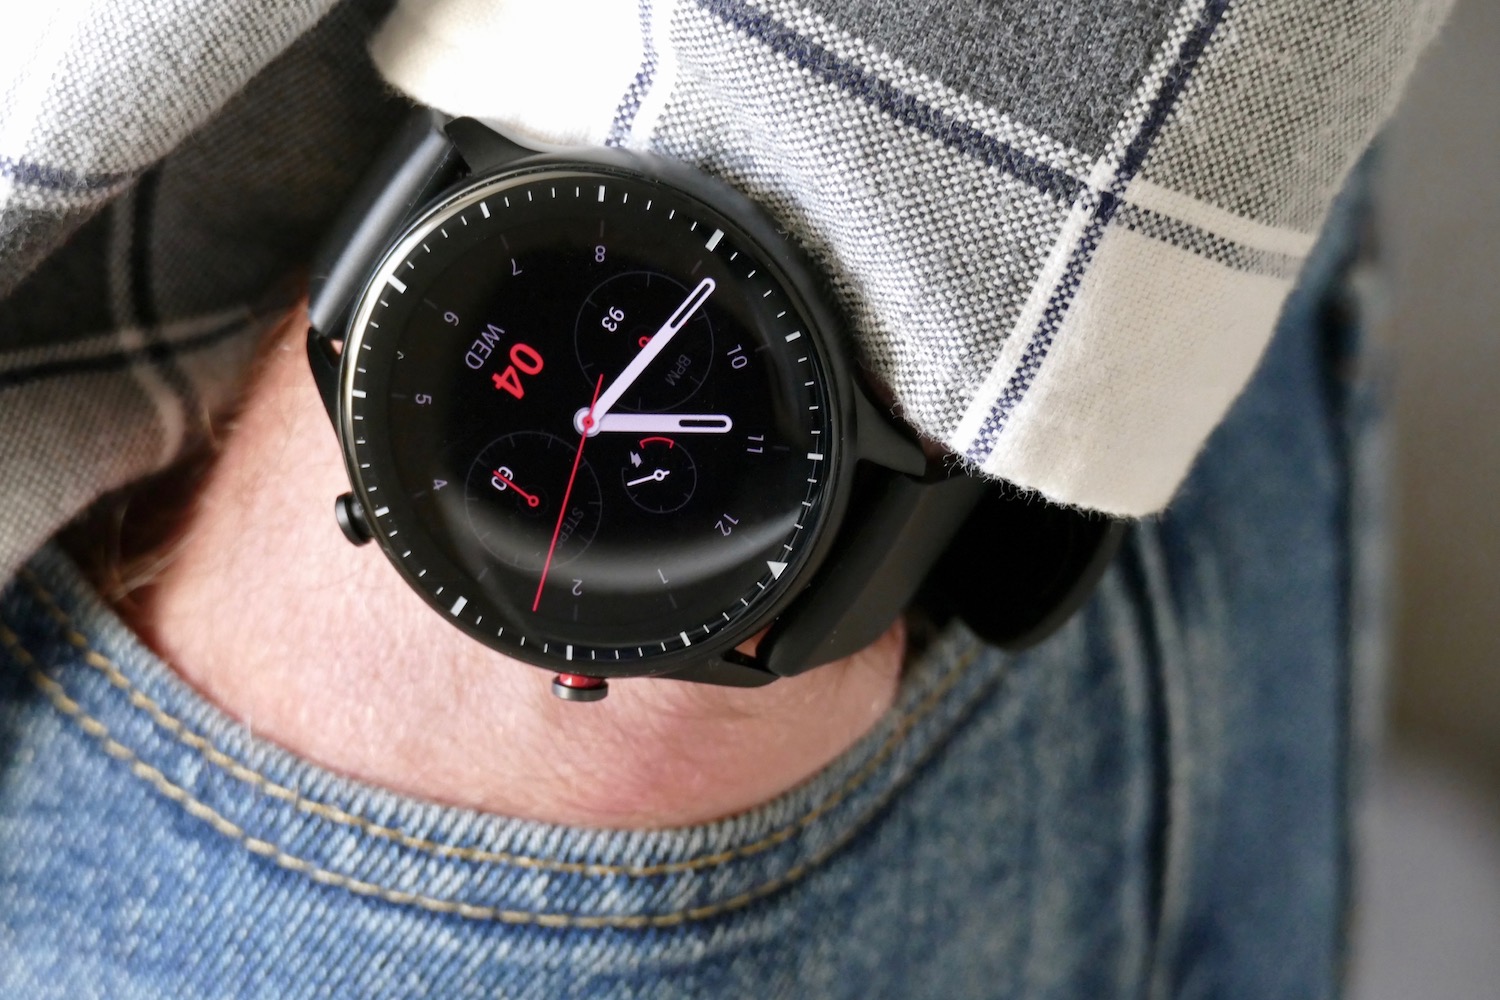 Amazfit GTR 2 Smartwatch Review - Consumer Reports